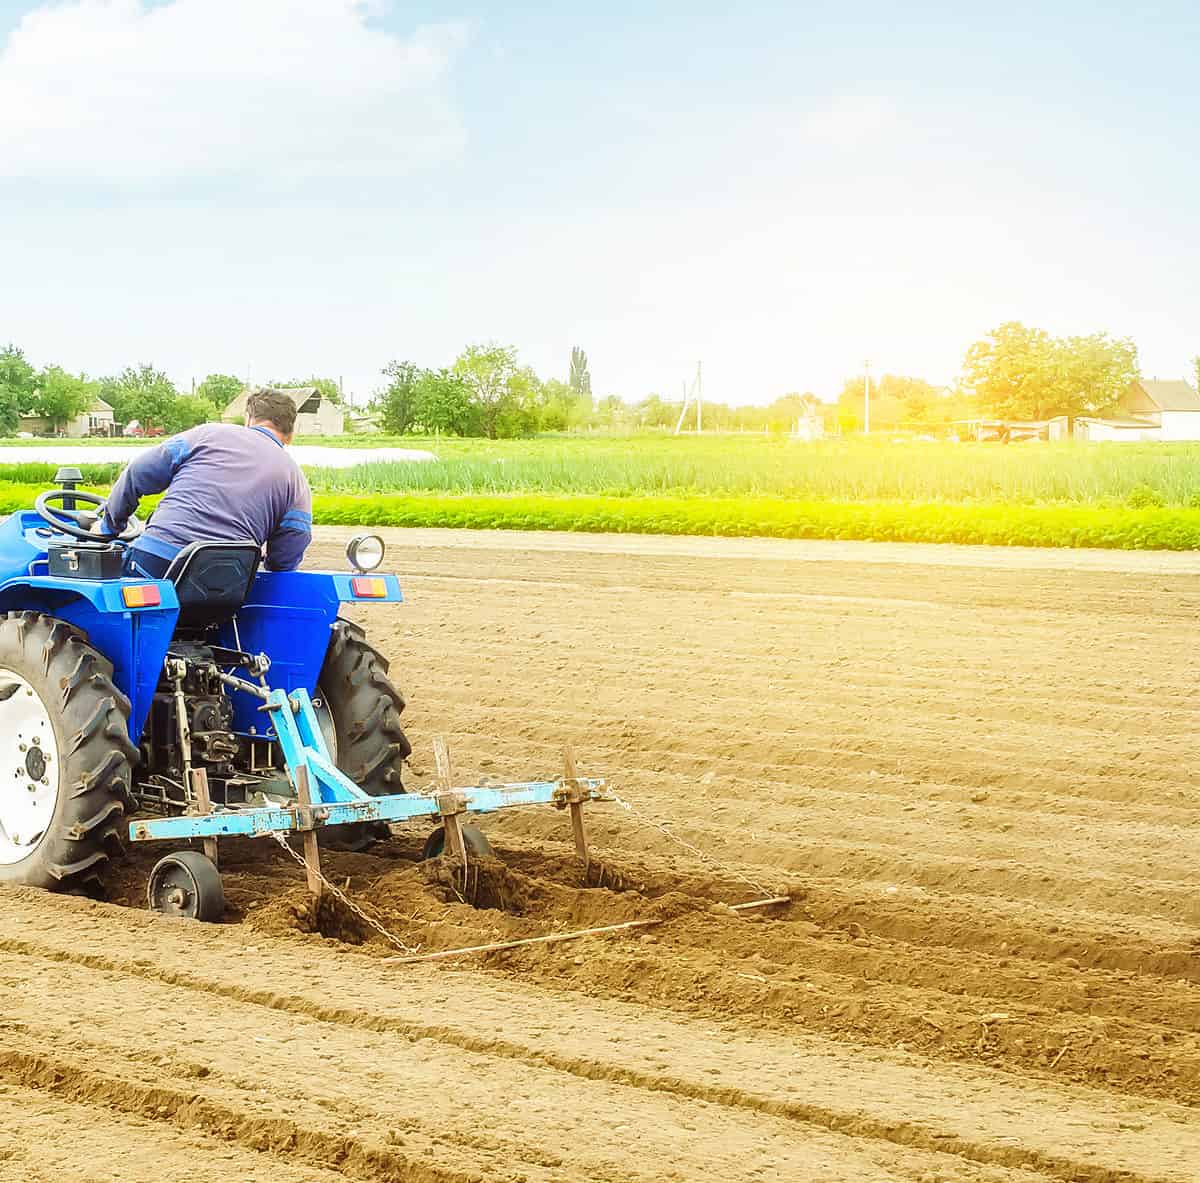 Farmer on a tractor making ridges and mounds rows on a farm field. Marking the area under planting. Soil preparation. Farming agribusiness. Agricultural industry. Growing vegetables food plants.